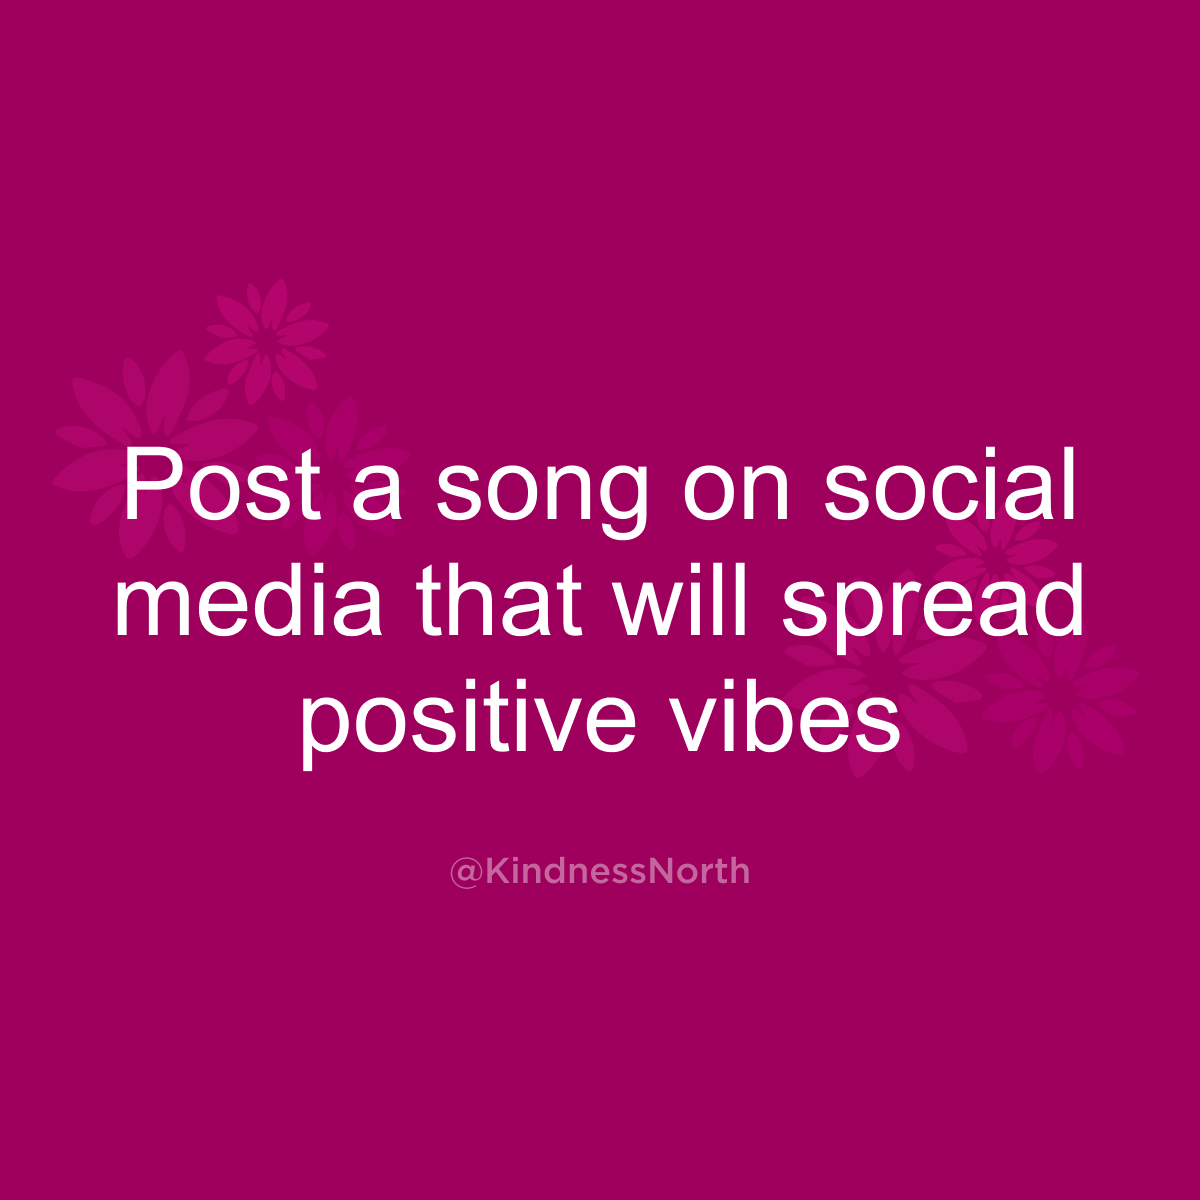 Post a song on social media that will spread positive vibes